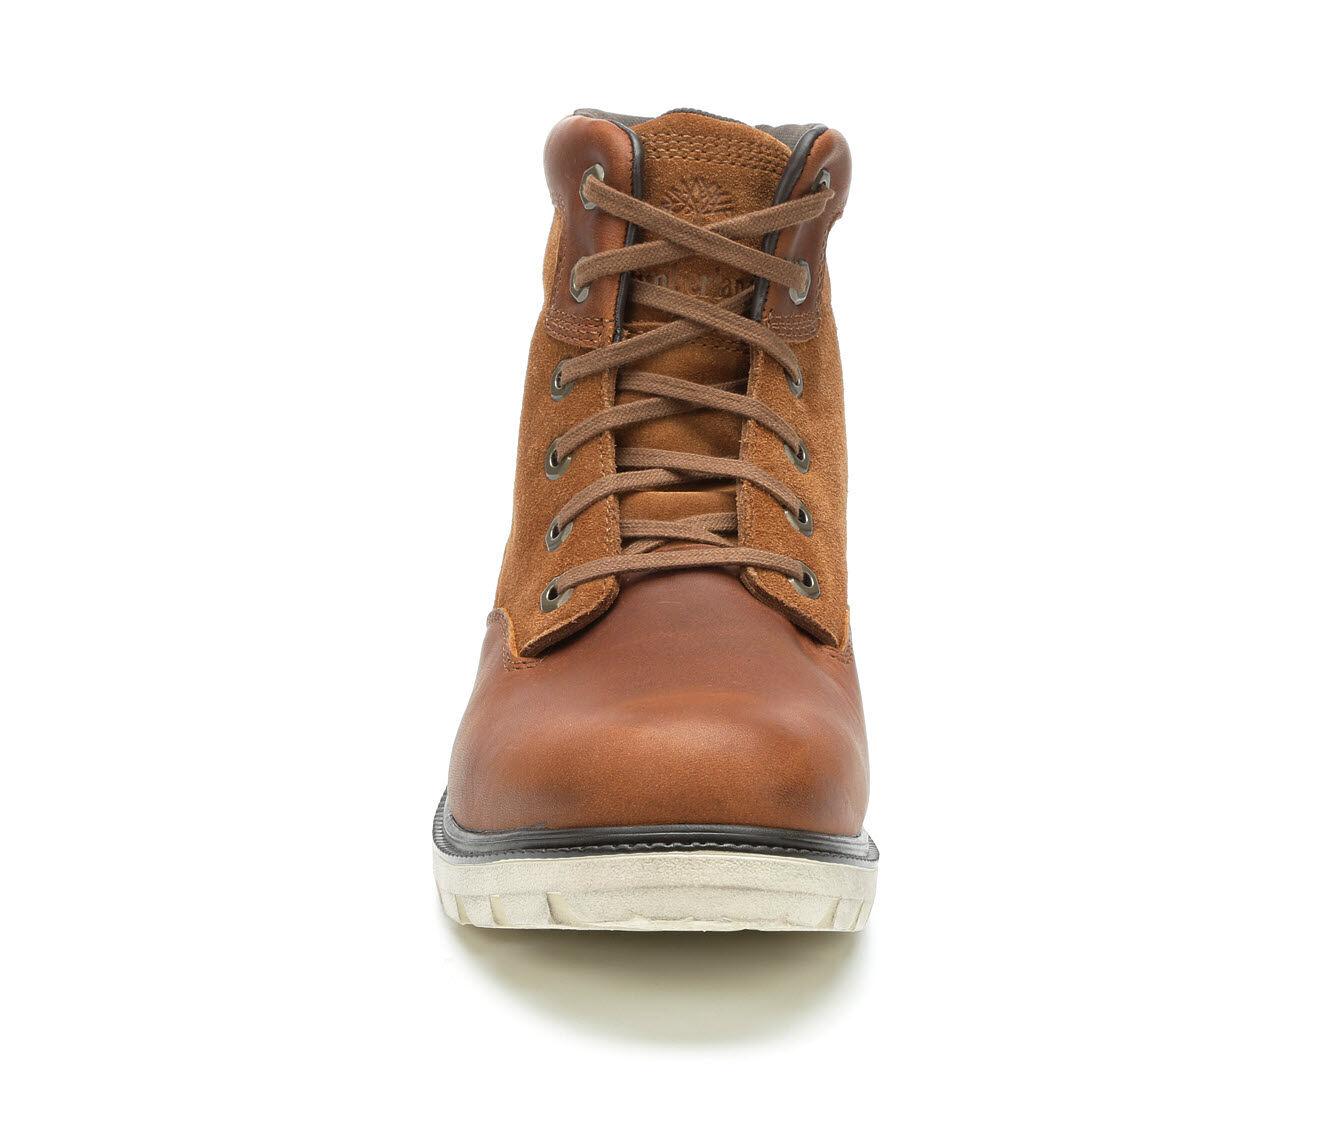 Timberland Walden Park Boot in Brown,Tan (Brown) for Men - Lyst